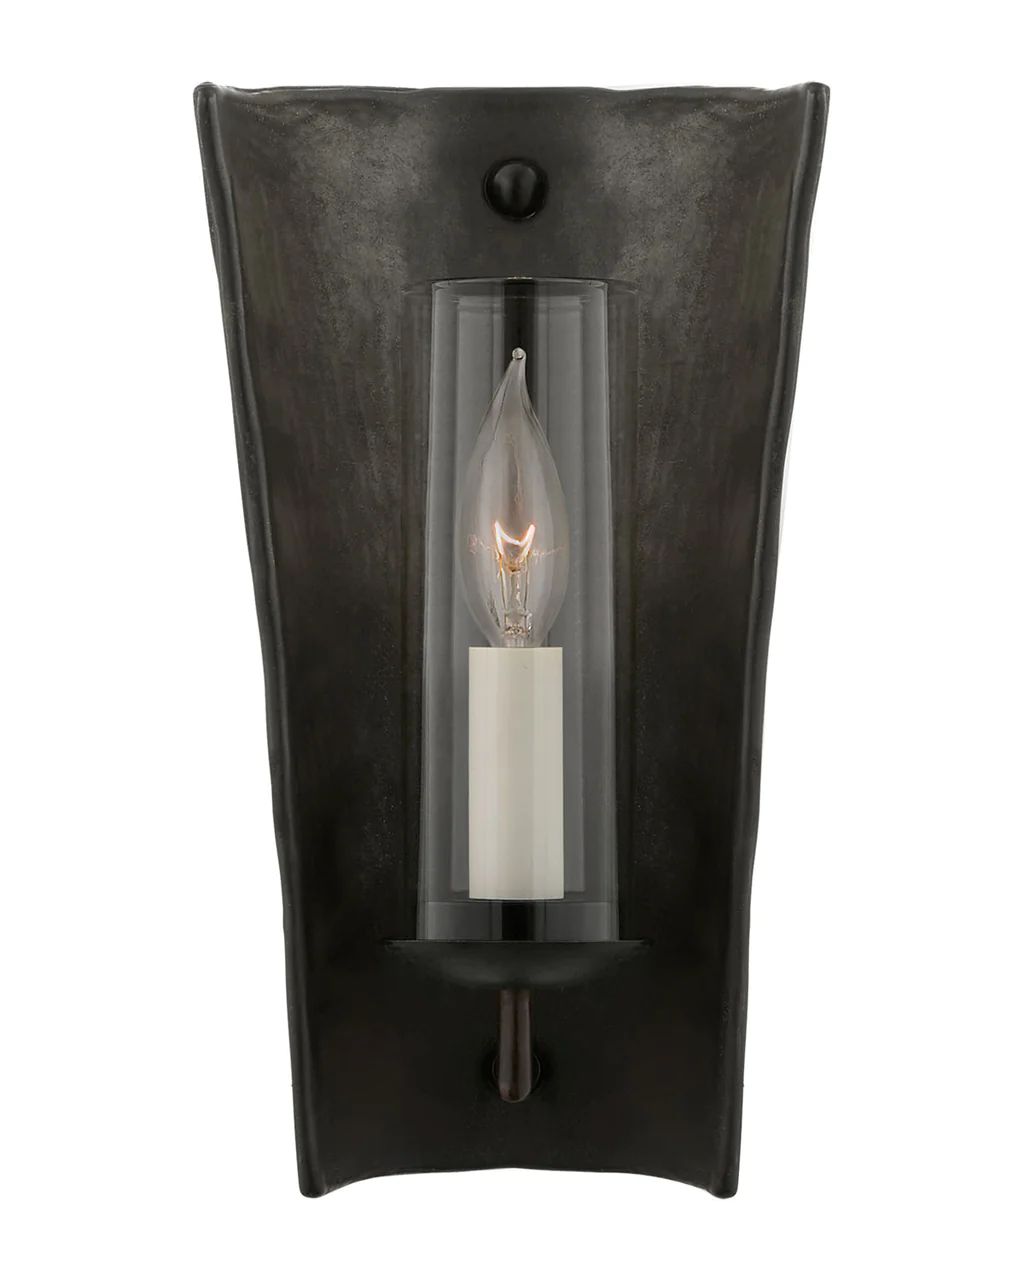 Downey Reflector Sconce | McGee & Co.